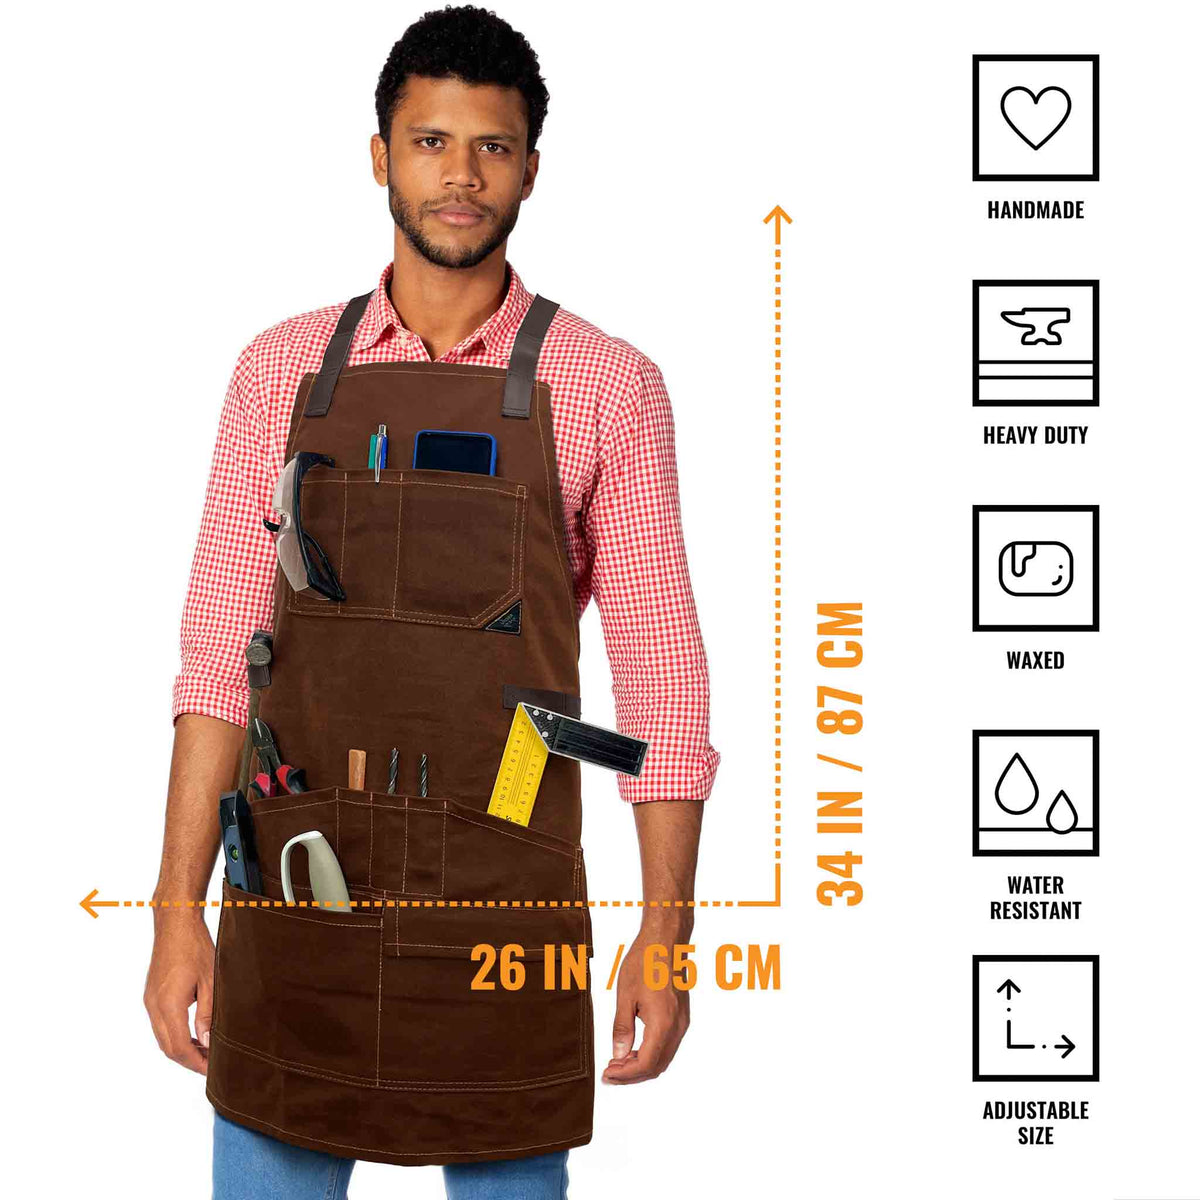 WoodWork Apron size graphic